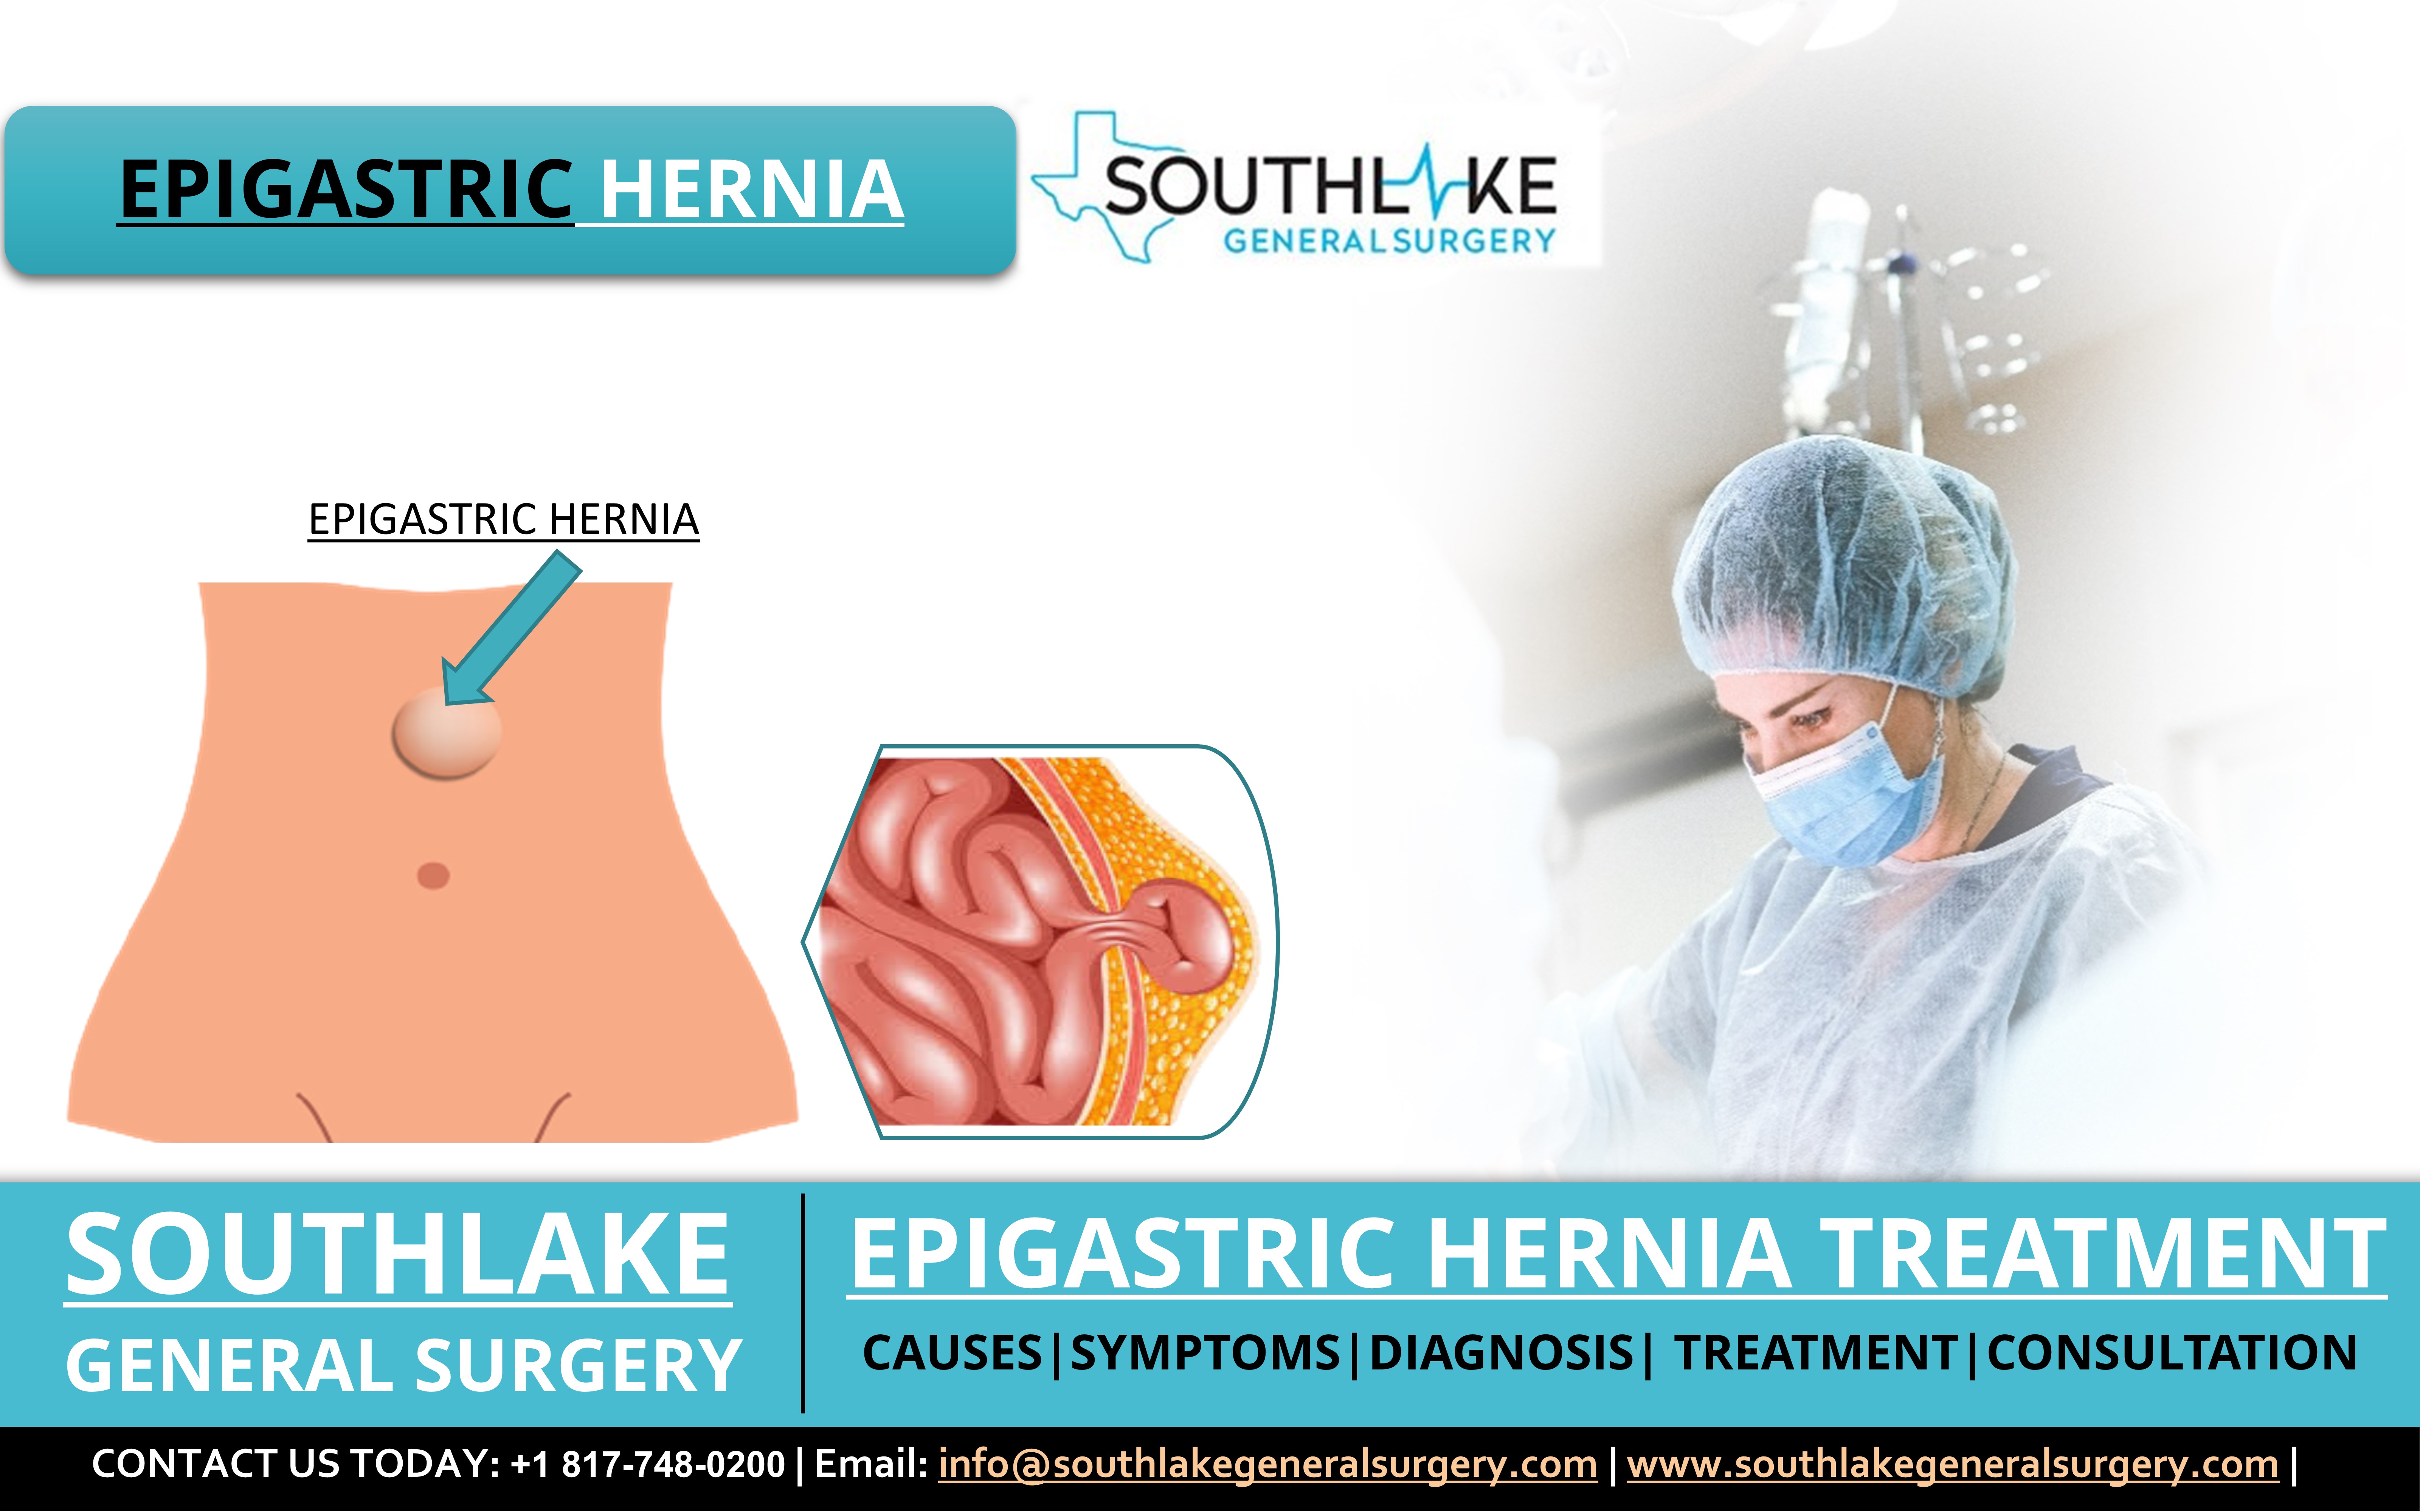 Epigastric Hernia Treatment at Southlake General Surgery, Texas